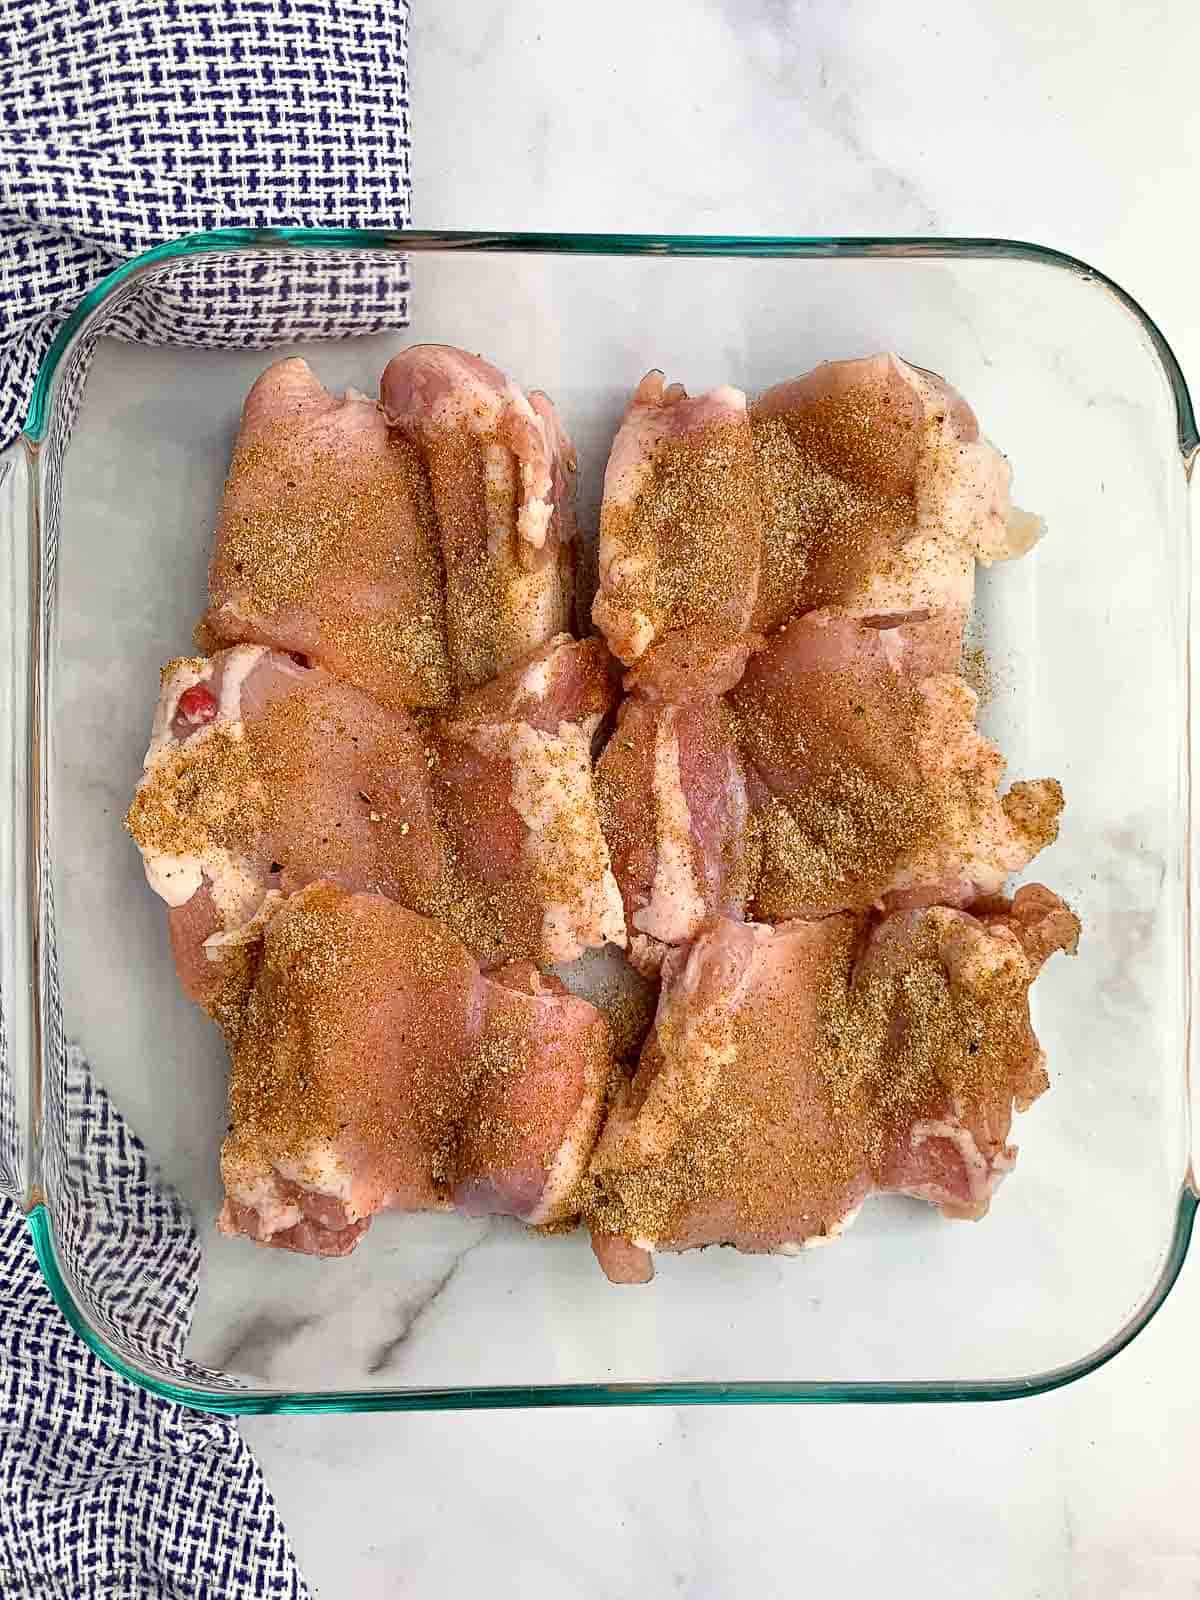 Raw chicken thighs with Moroccan spices in a glass baking dish.